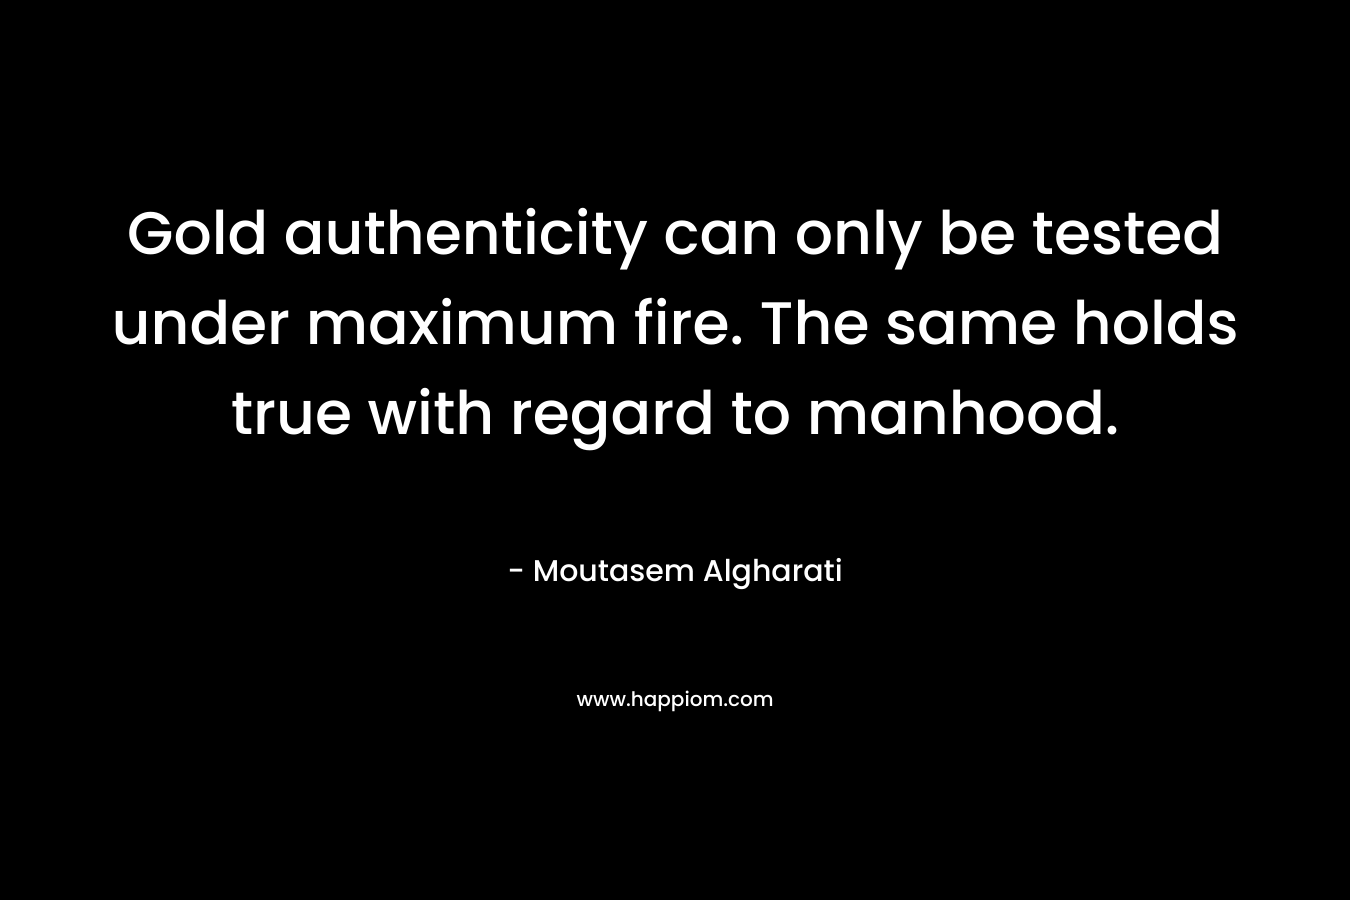 Gold authenticity can only be tested under maximum fire. The same holds true with regard to manhood.